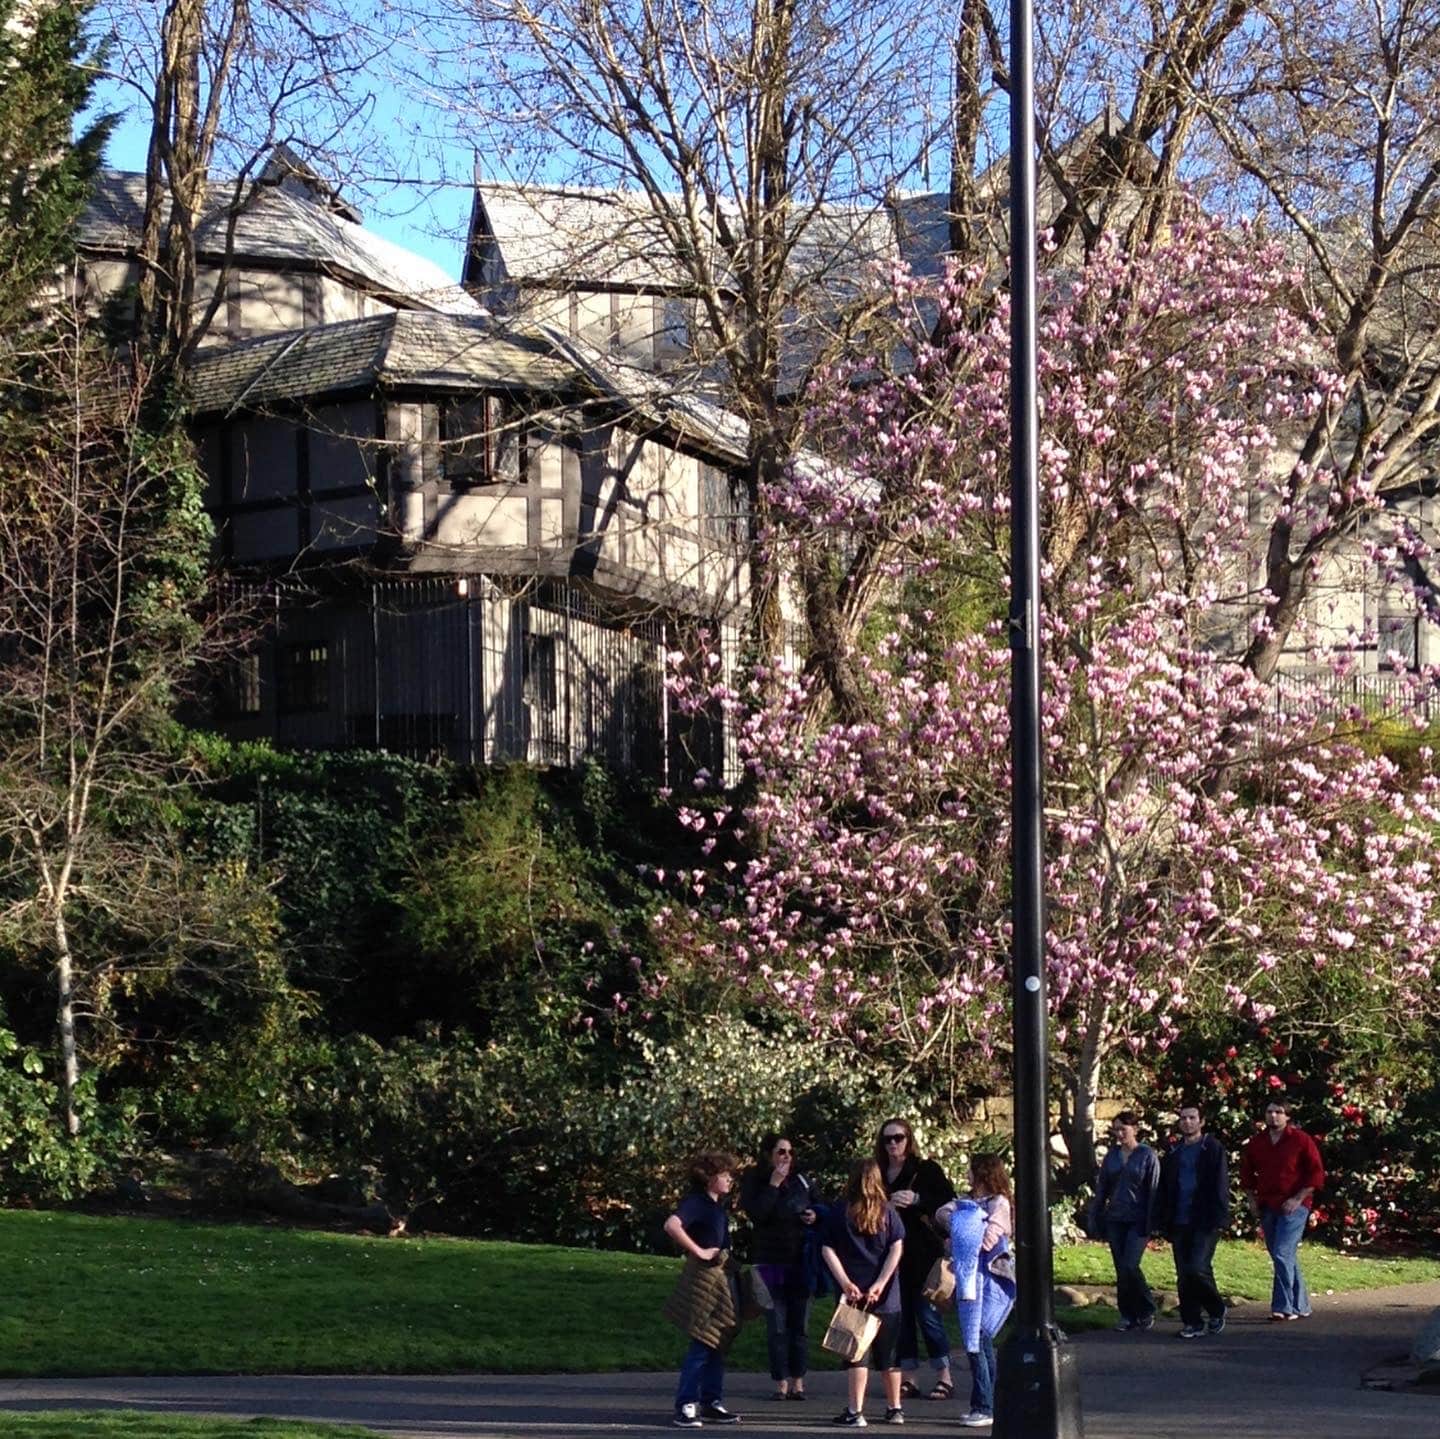 Shakespeare Outdoor Theatre view from Lithia Park in Spring